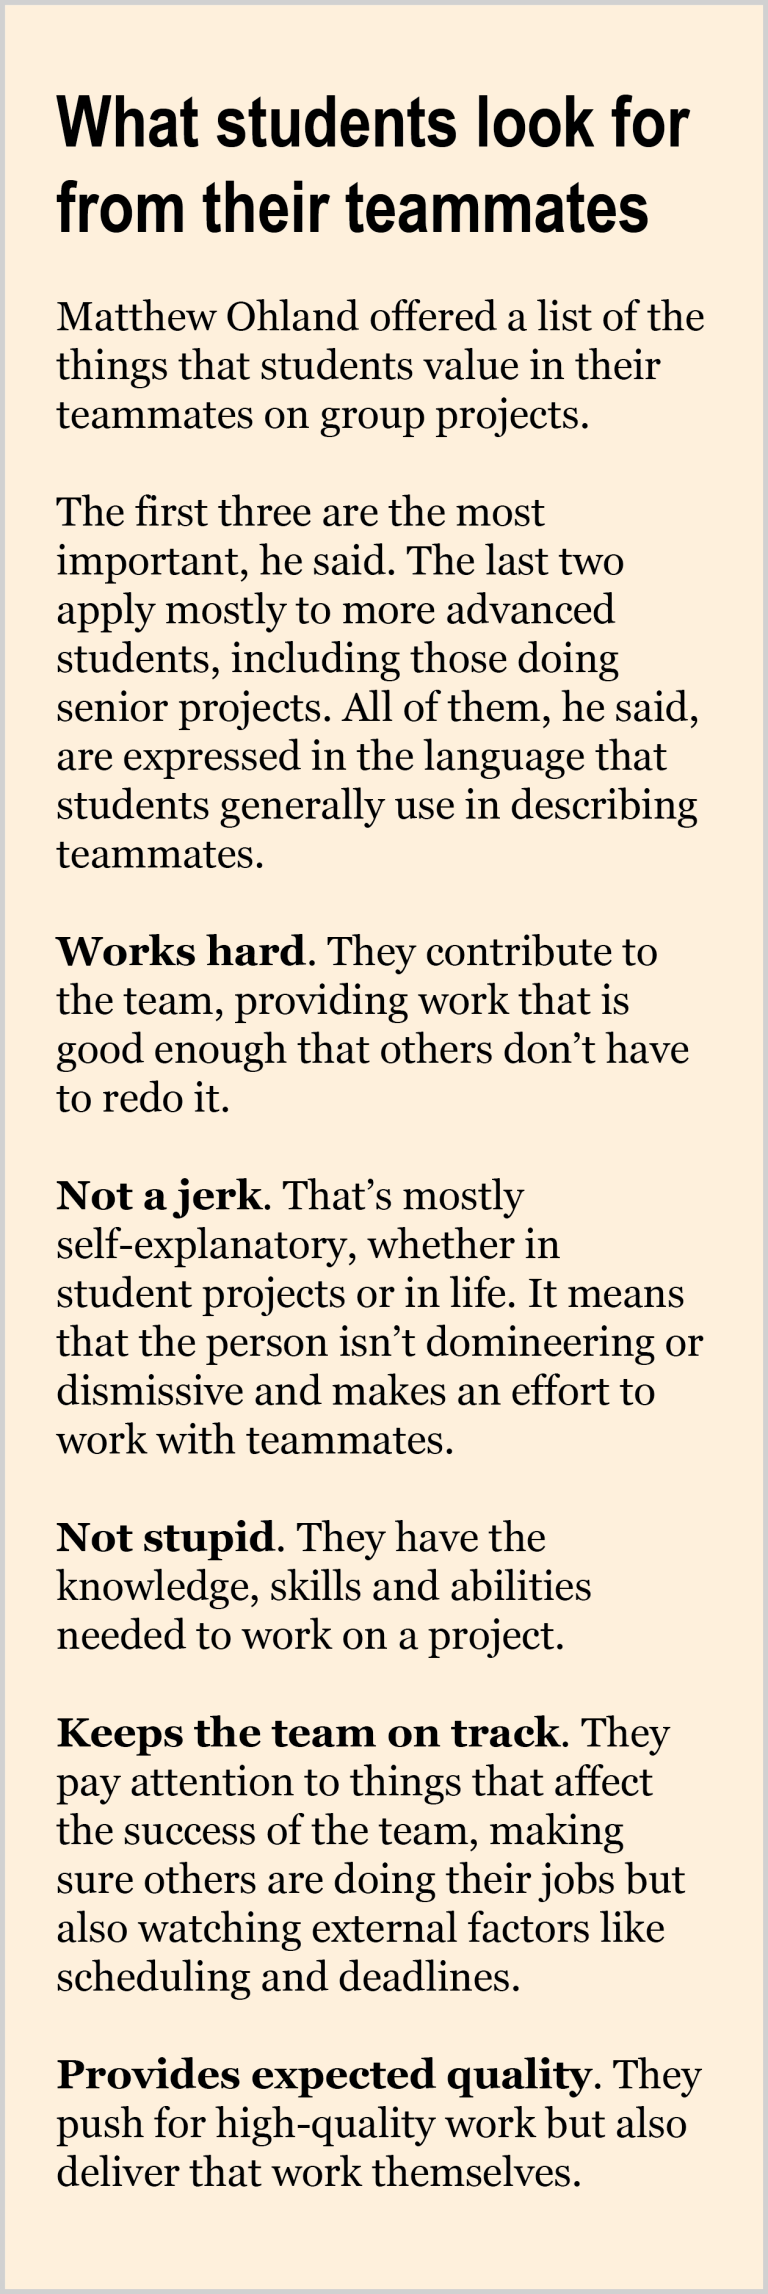 Graphic that says what students look for from their teammate' that includes 'works hard', 'not a jerk', and 'not stupid'